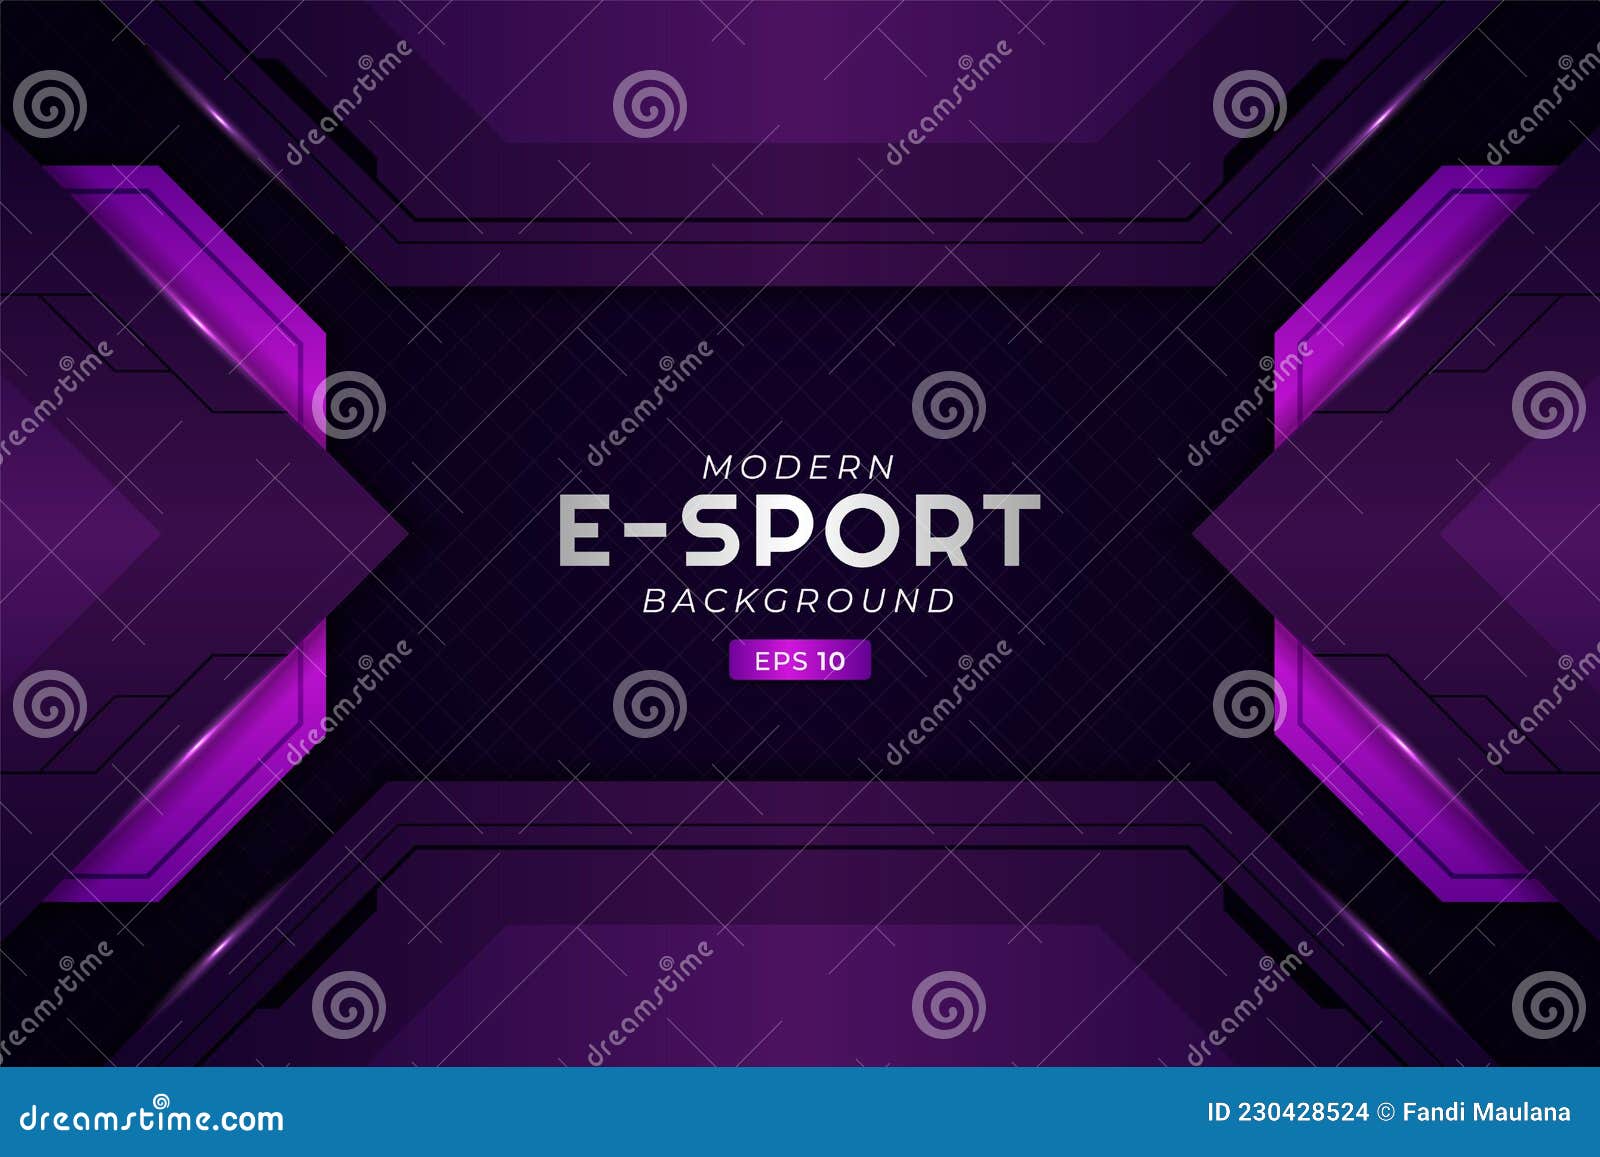 Modern E-Sport Gaming Background Glowing Purple Futuristic Premium  Technology Stock Vector - Illustration of layout, business: 230428524